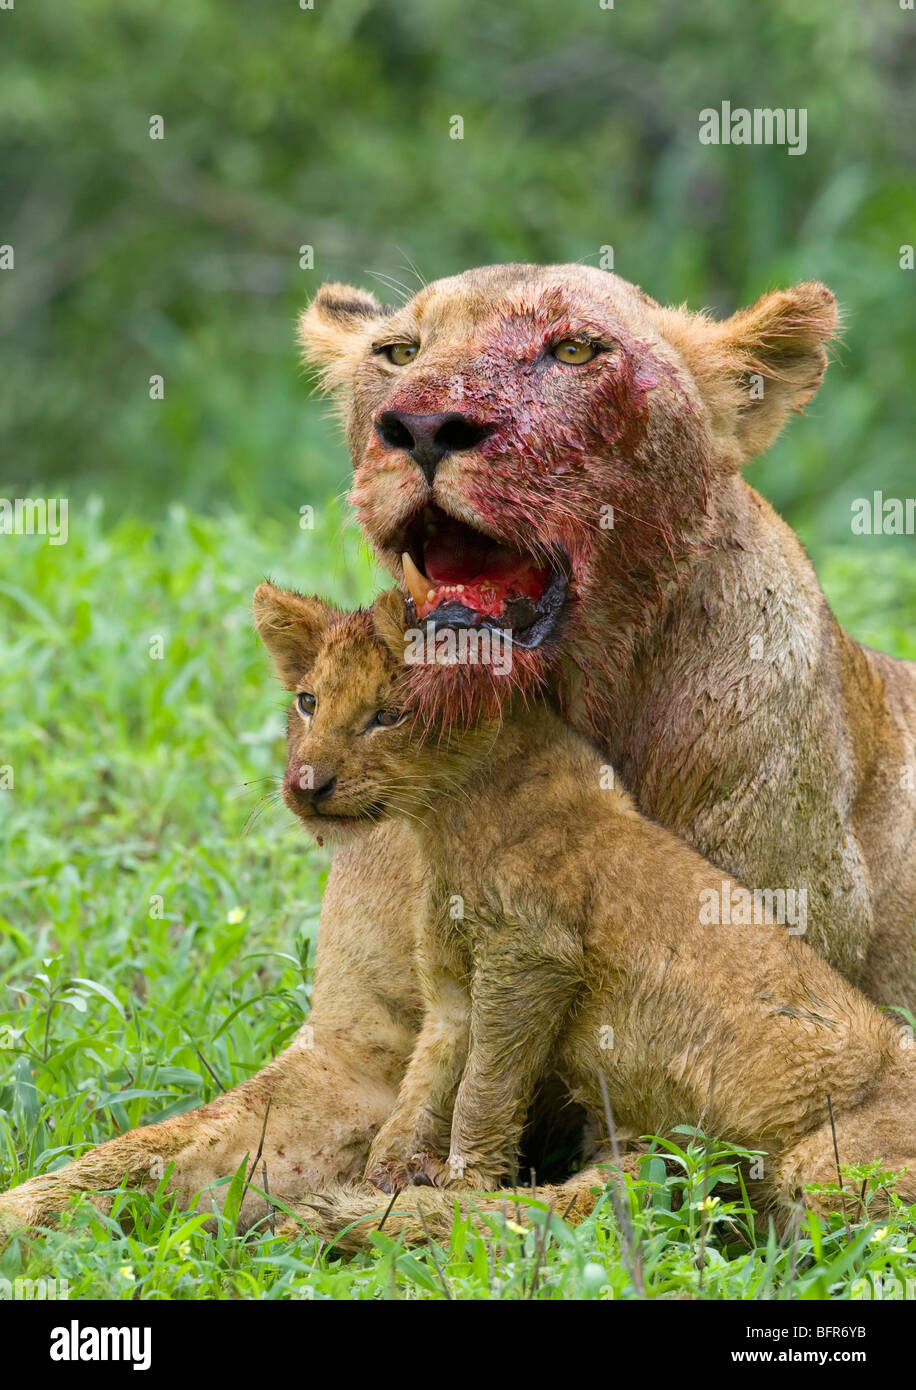 Lioness with bloody face and cub Stock Photo